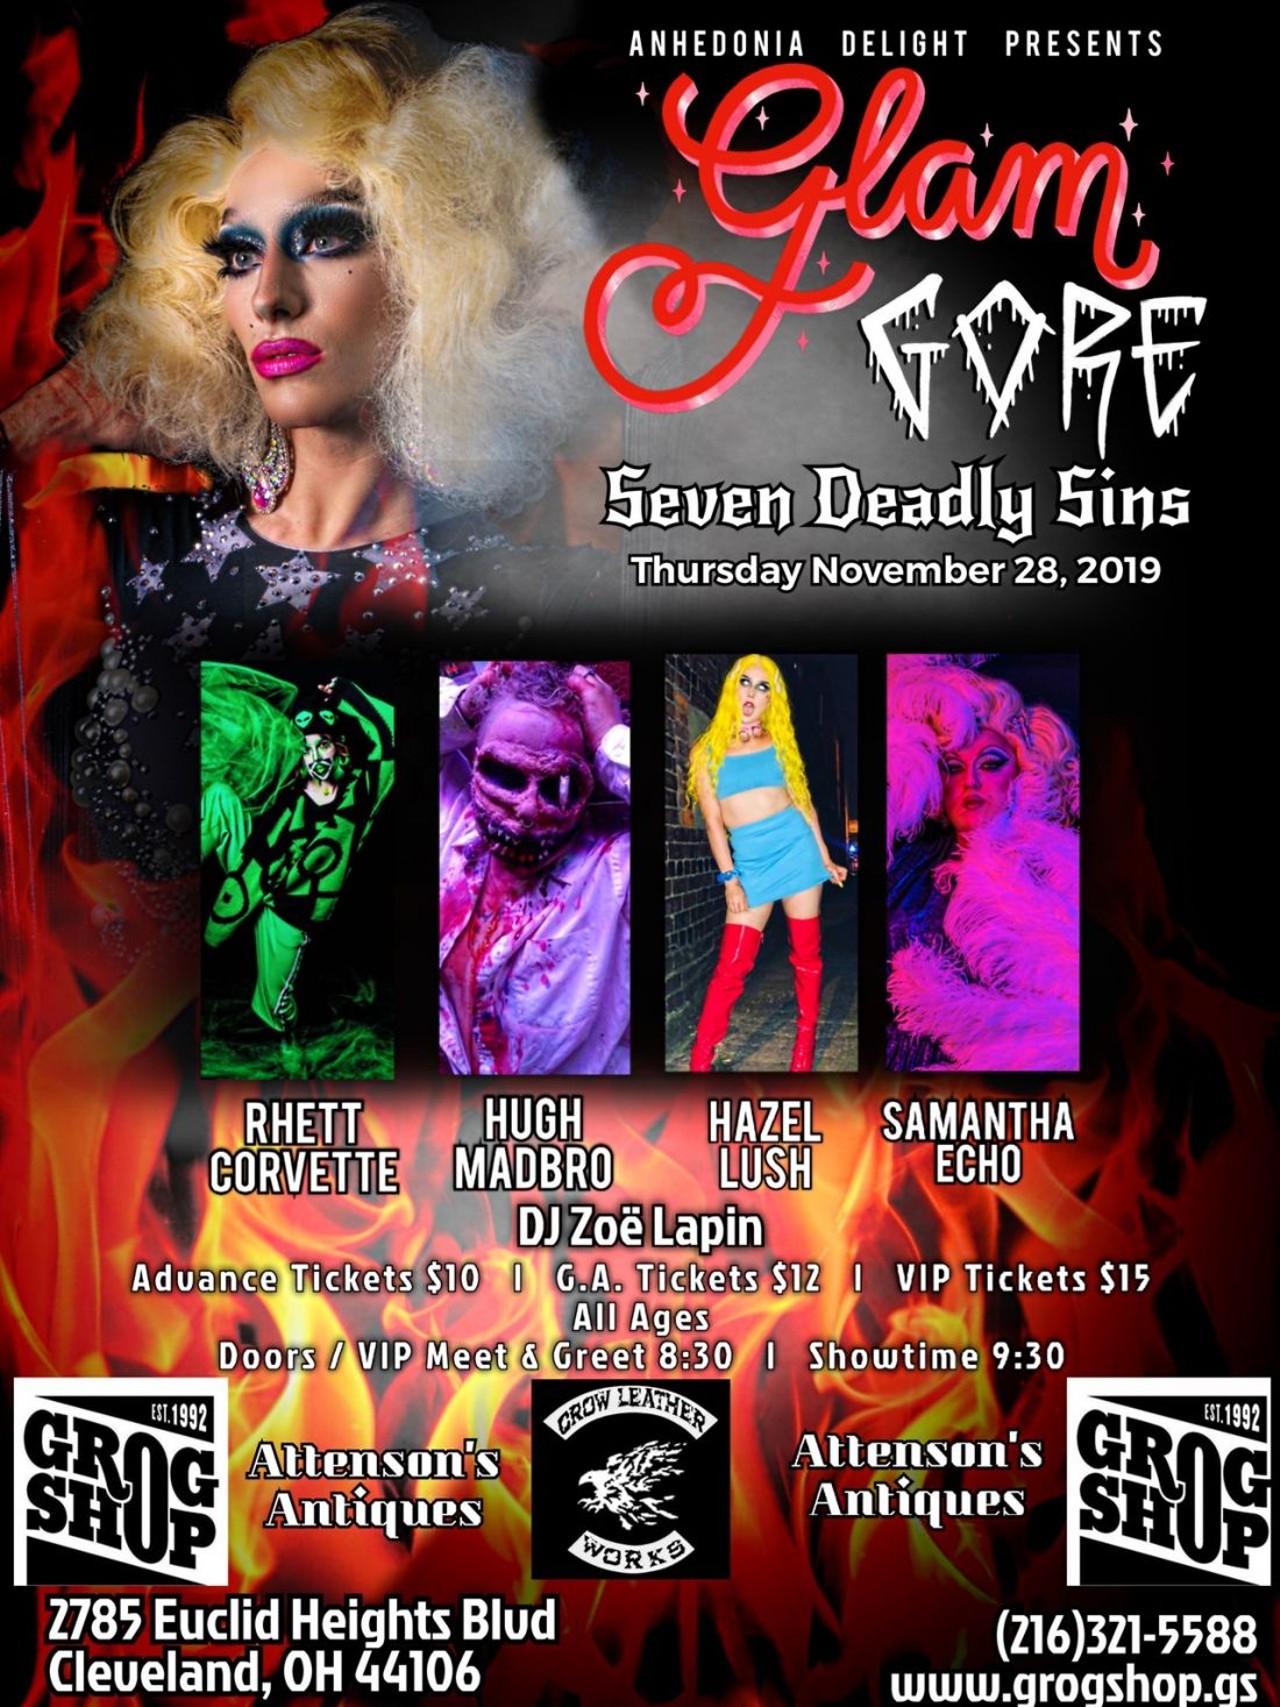  GlamGore Monthly Drag Show at Grog Shop
Thu, Nov. 28
Event Poster Artwork